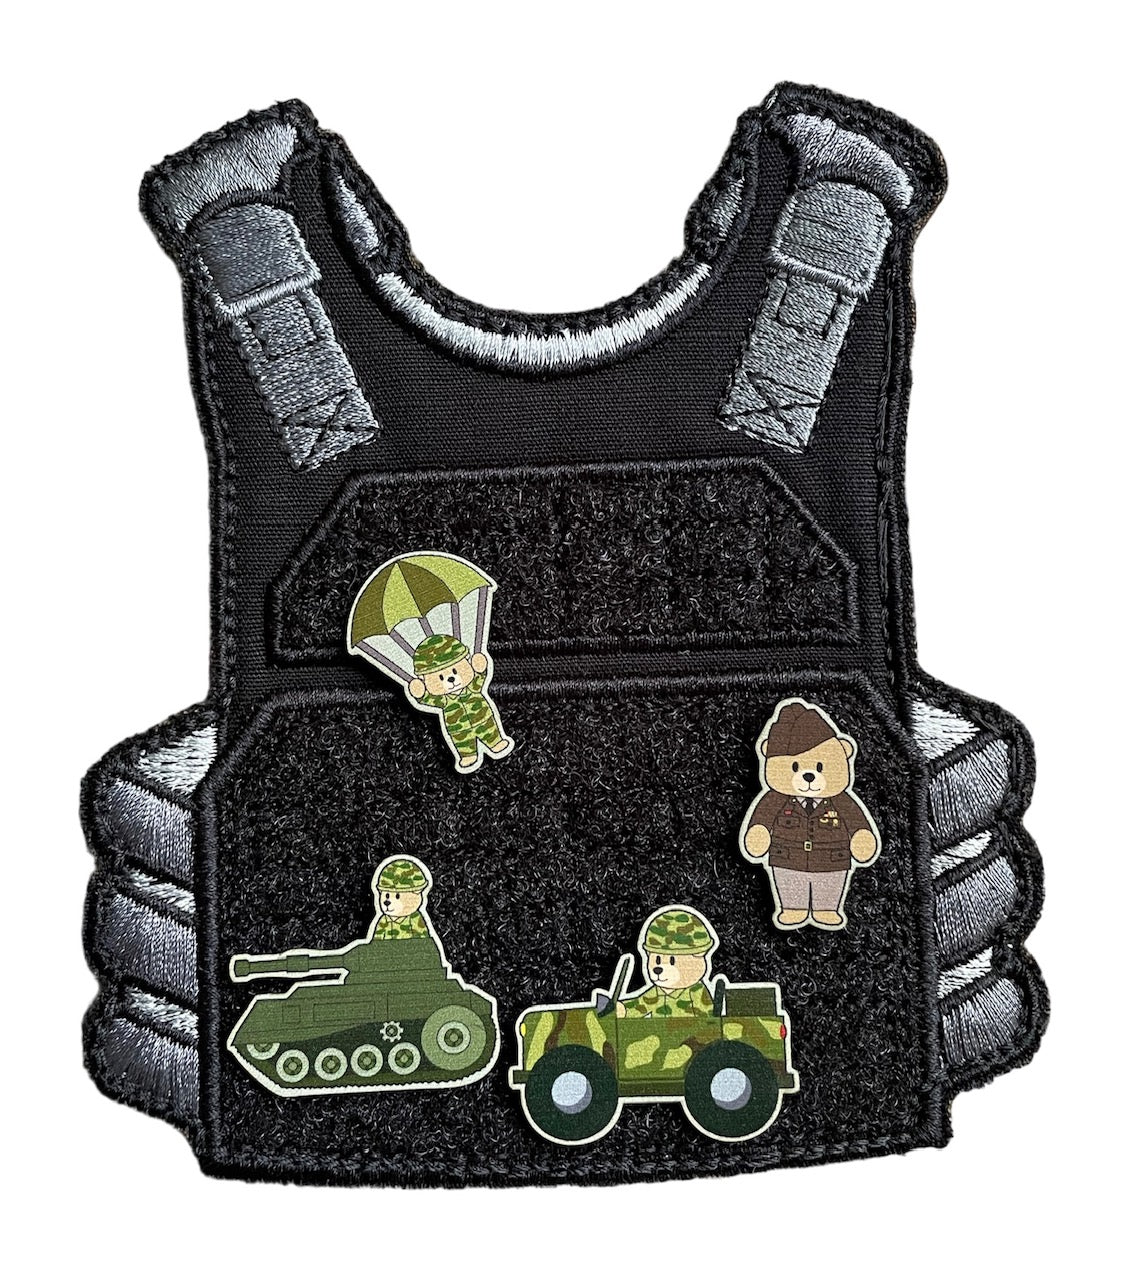 Patches on your plate carrier? 